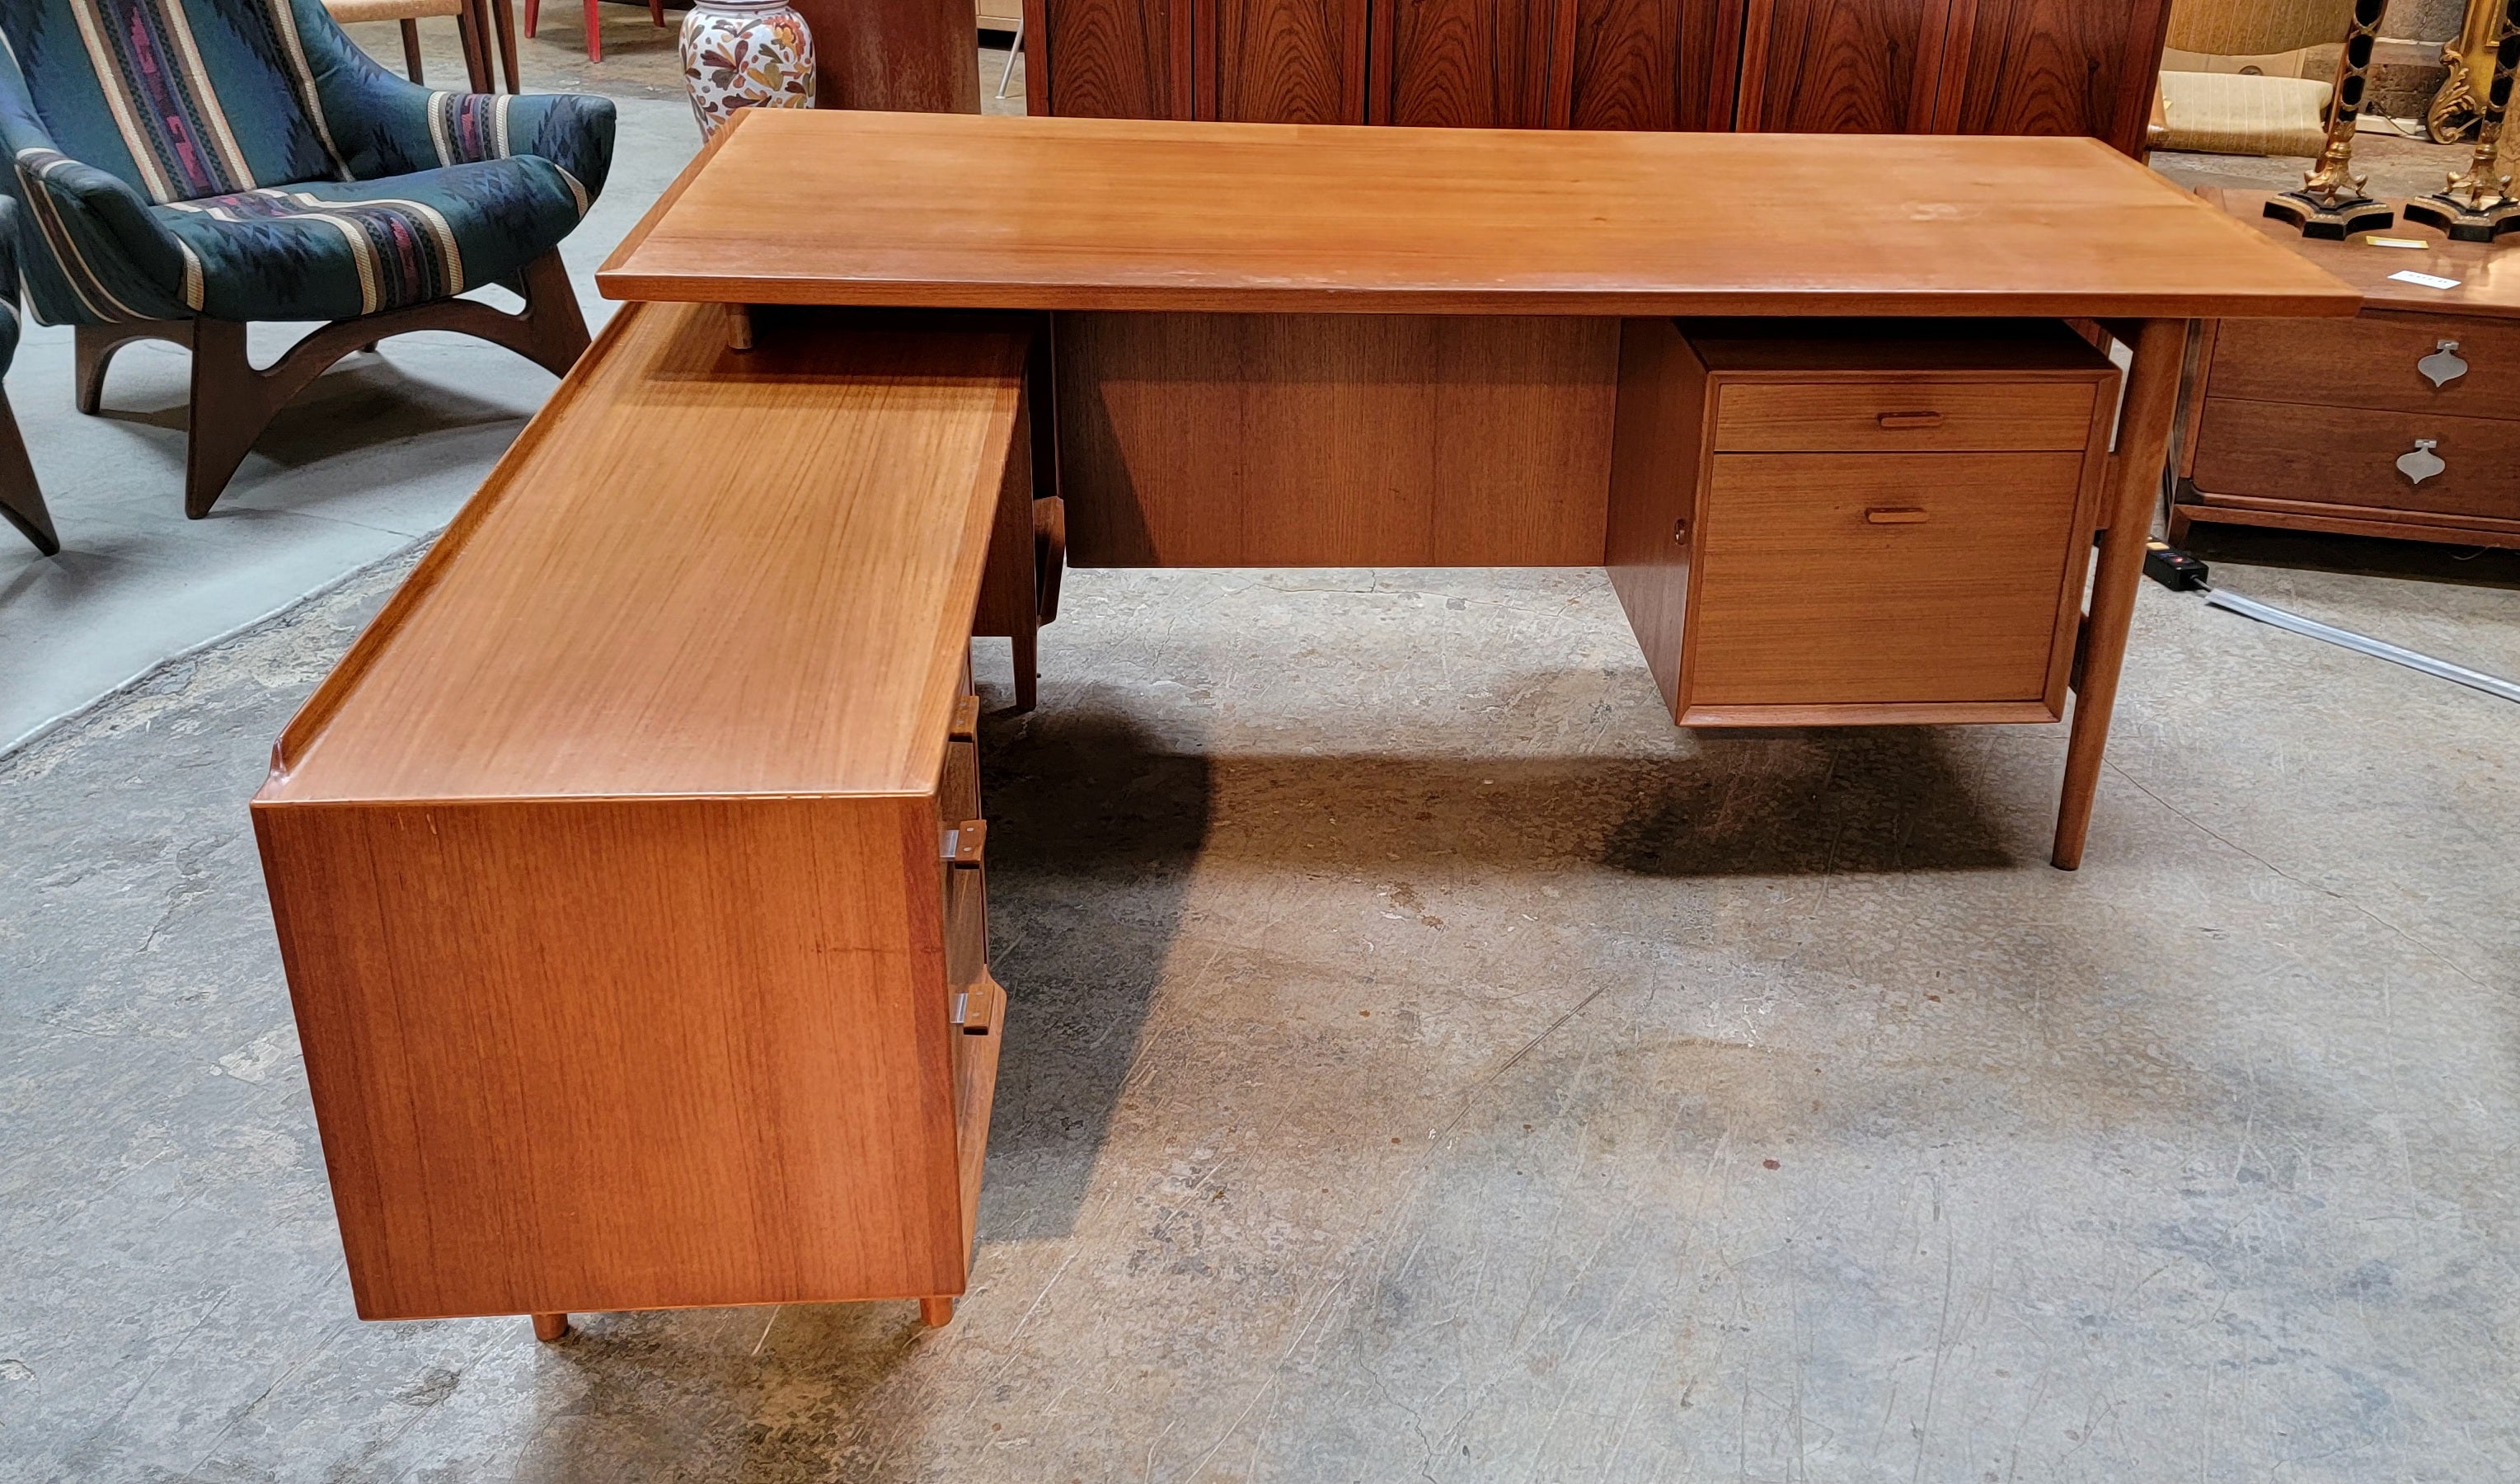 Fine teak Danish Modern L-Shaped executive or work desk designed by Arne Vodder for Sibast, Denmark. Ample leg room for working at desk or credenza. Consists of 5 drawers, one being a file drawer. Open storage on right side of credenza is a good fit